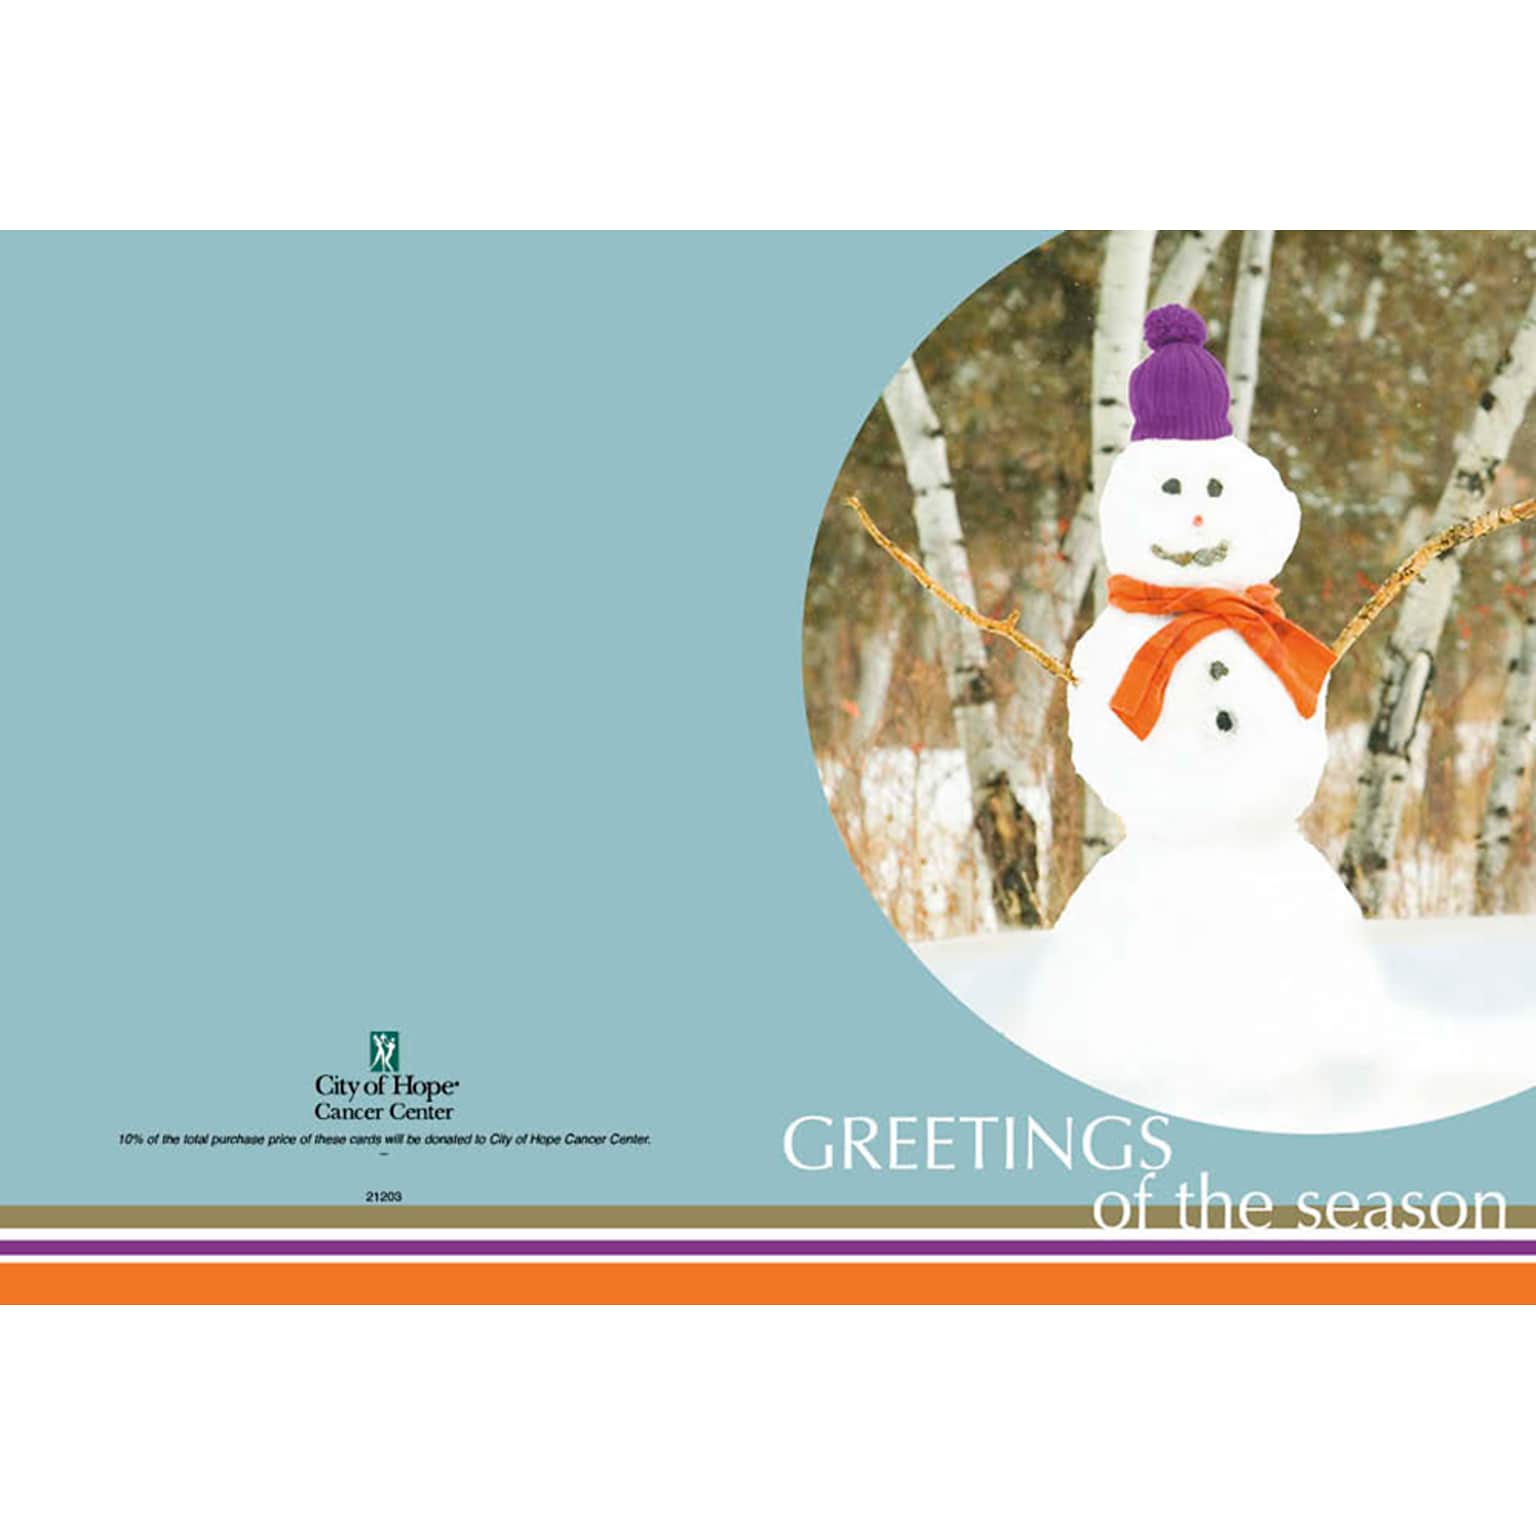 Greetings of the Season - cancer center card - snowman - 7 x 10 scored for folding to 7 x 5, 25 cards w/A7 envelopes per set